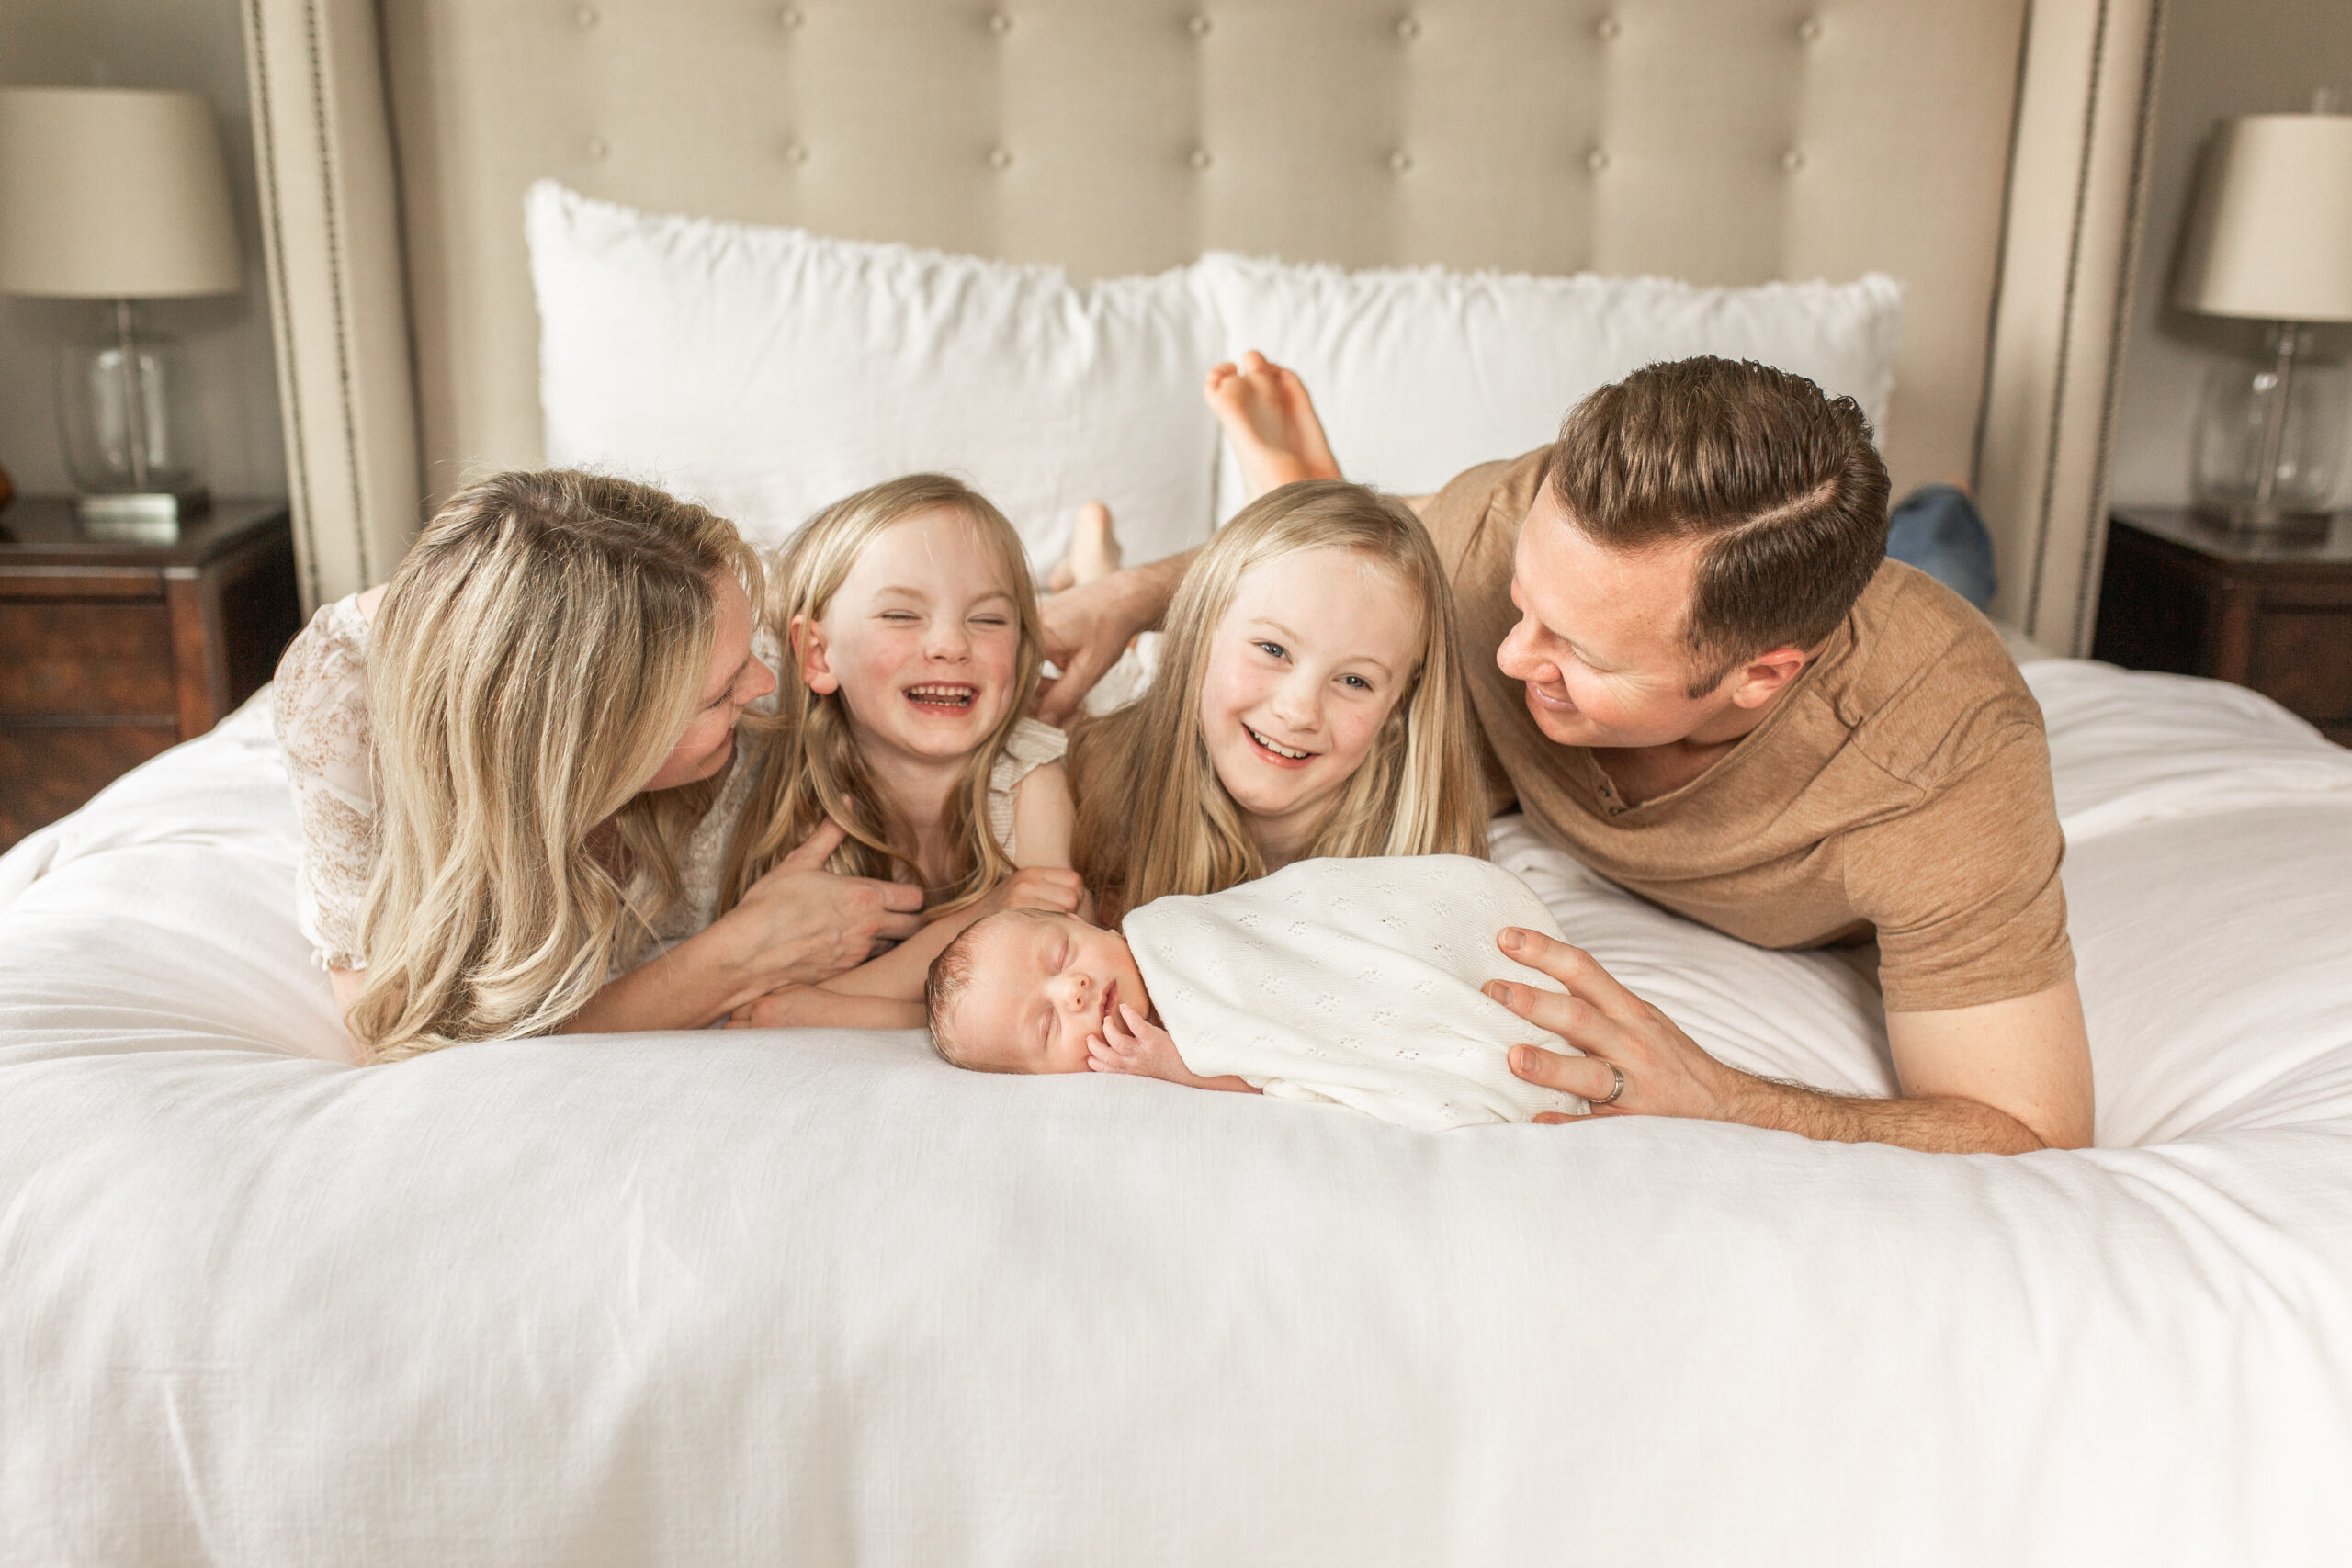 Family laughing with newborn baby and 2 sisters